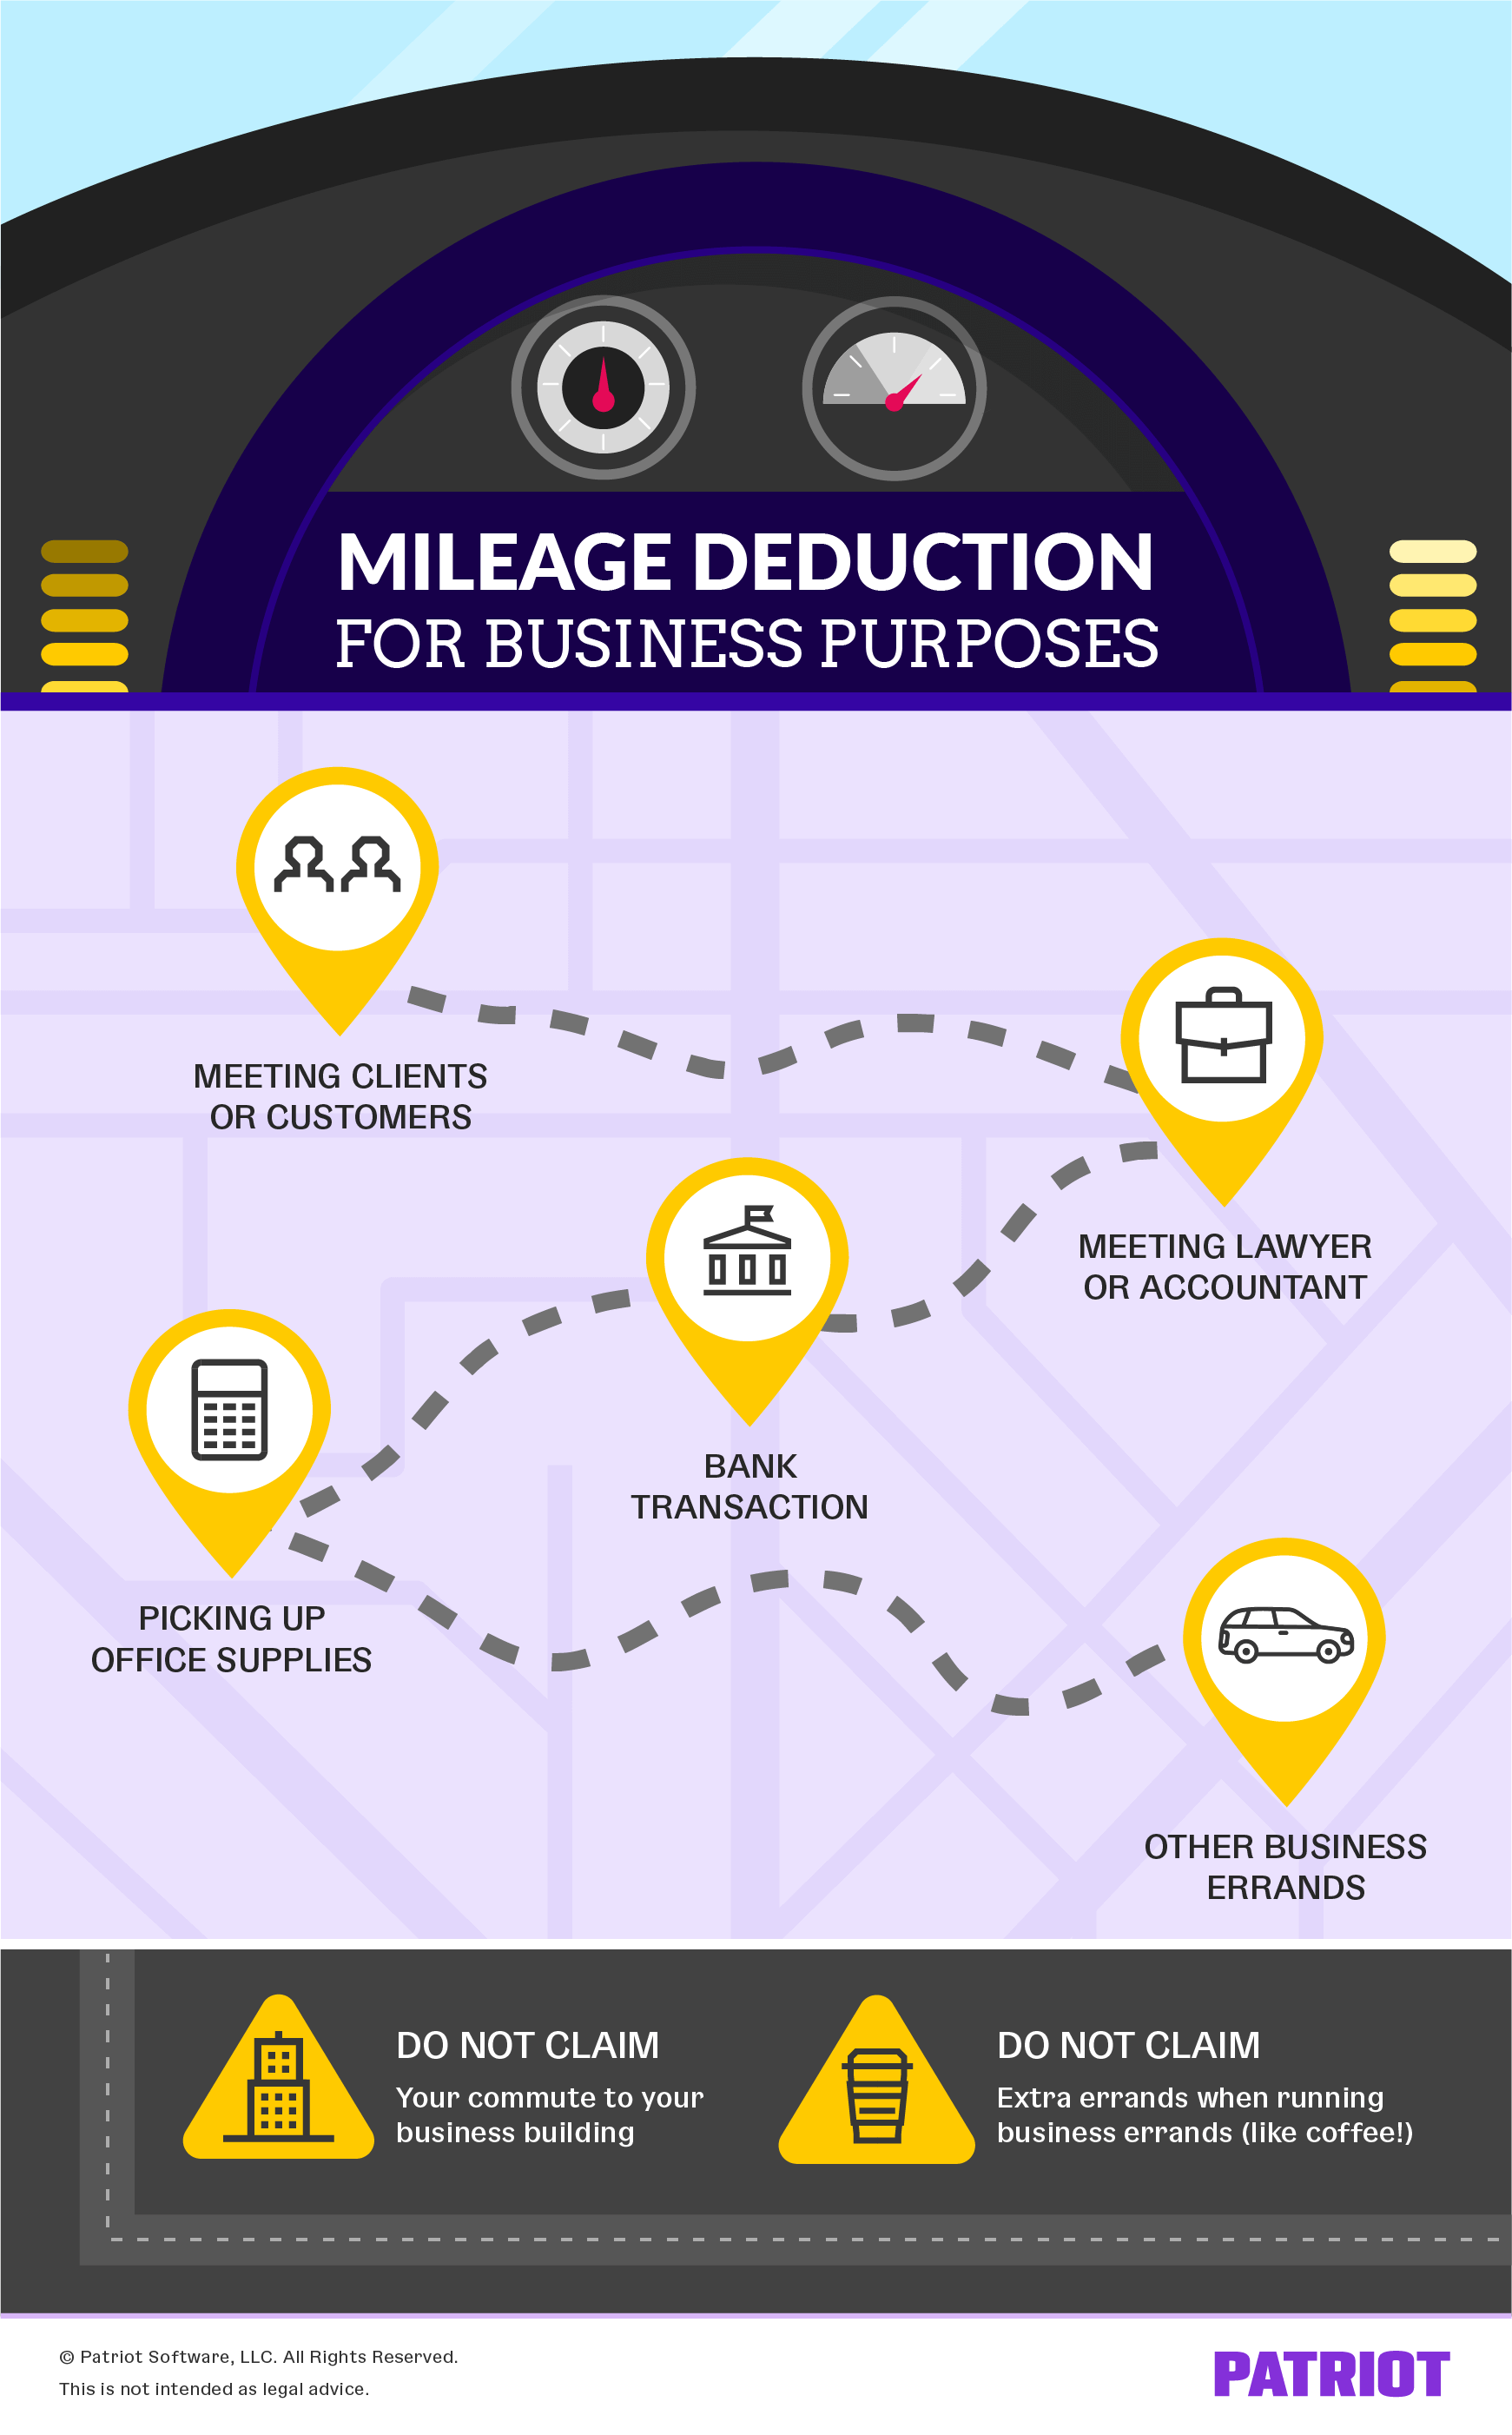 Business Mileage Deduction 101 How To Calculate For Taxes 